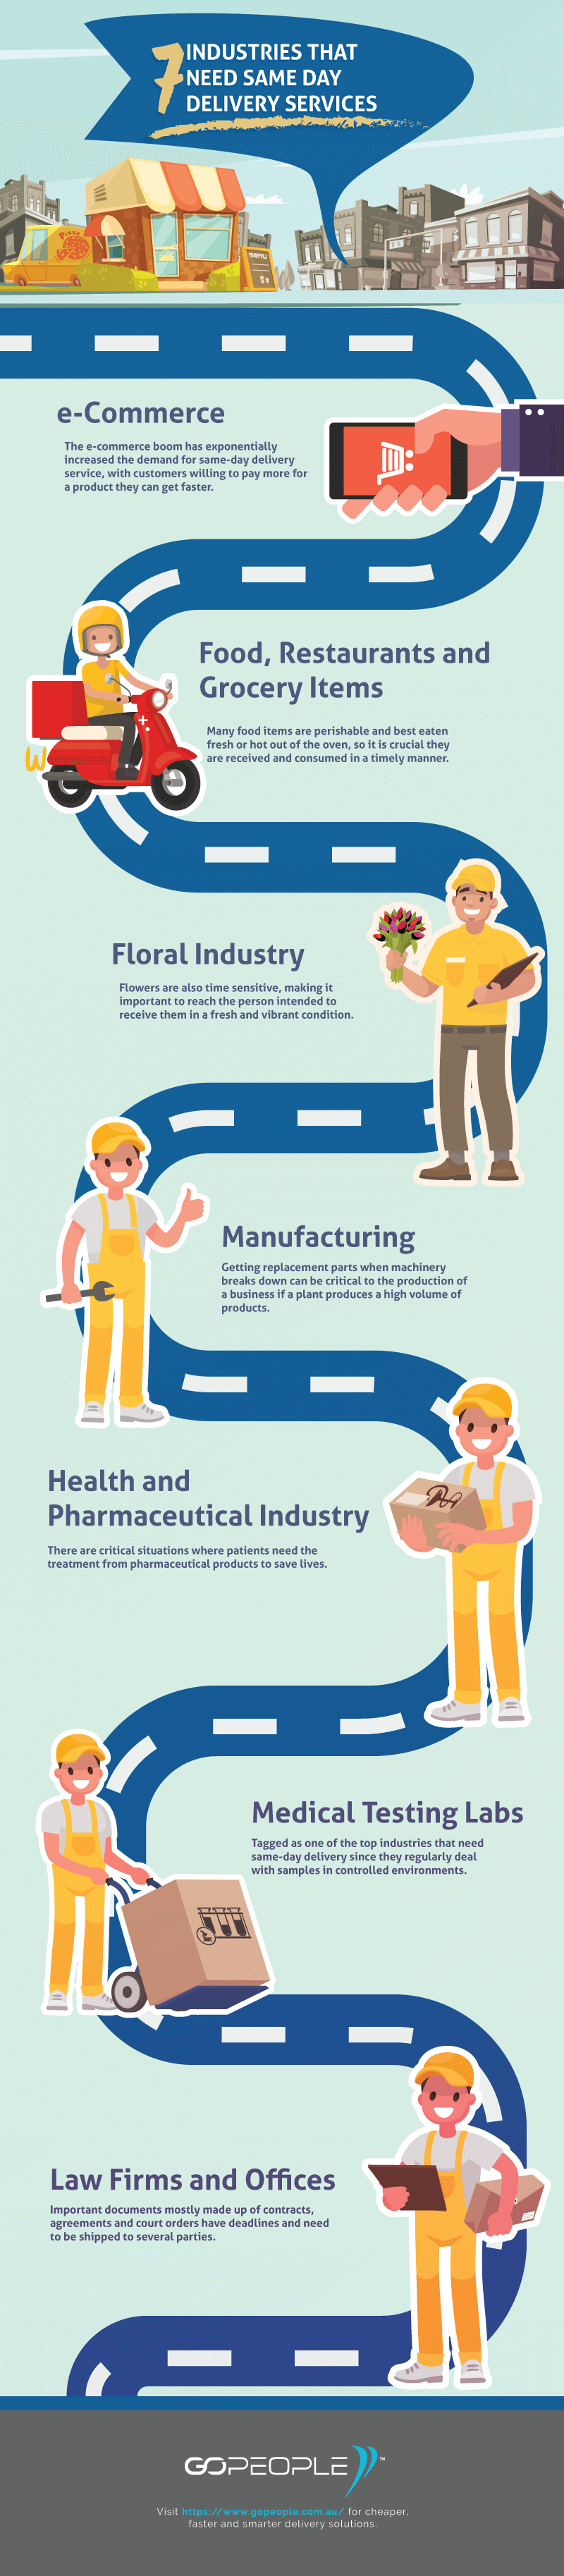 7-Industries-that-Need-Same-Day-Delivery-Services